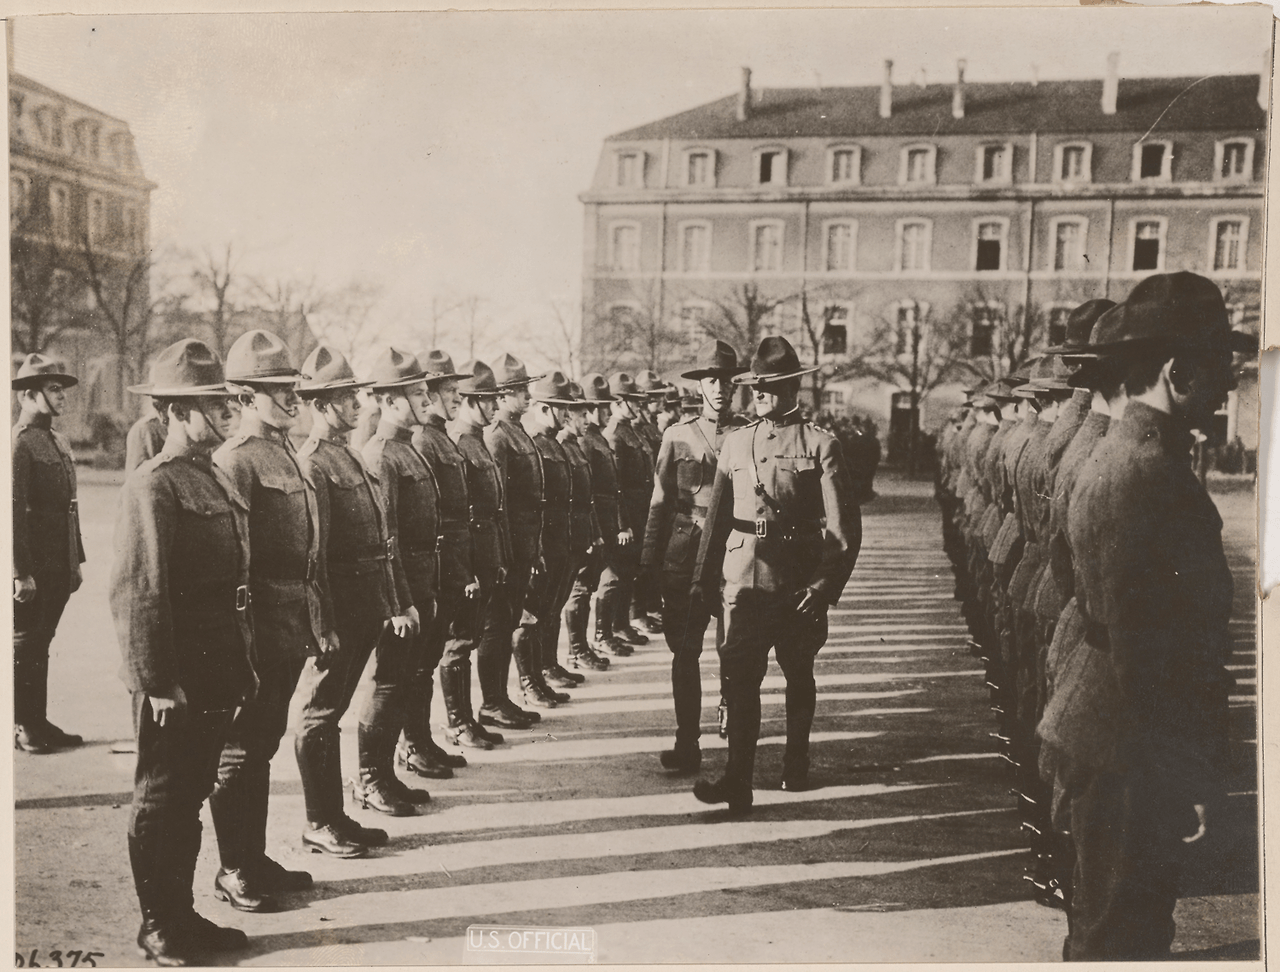 General Pershing inspecting U.S. troops at Chaumont, France 1917